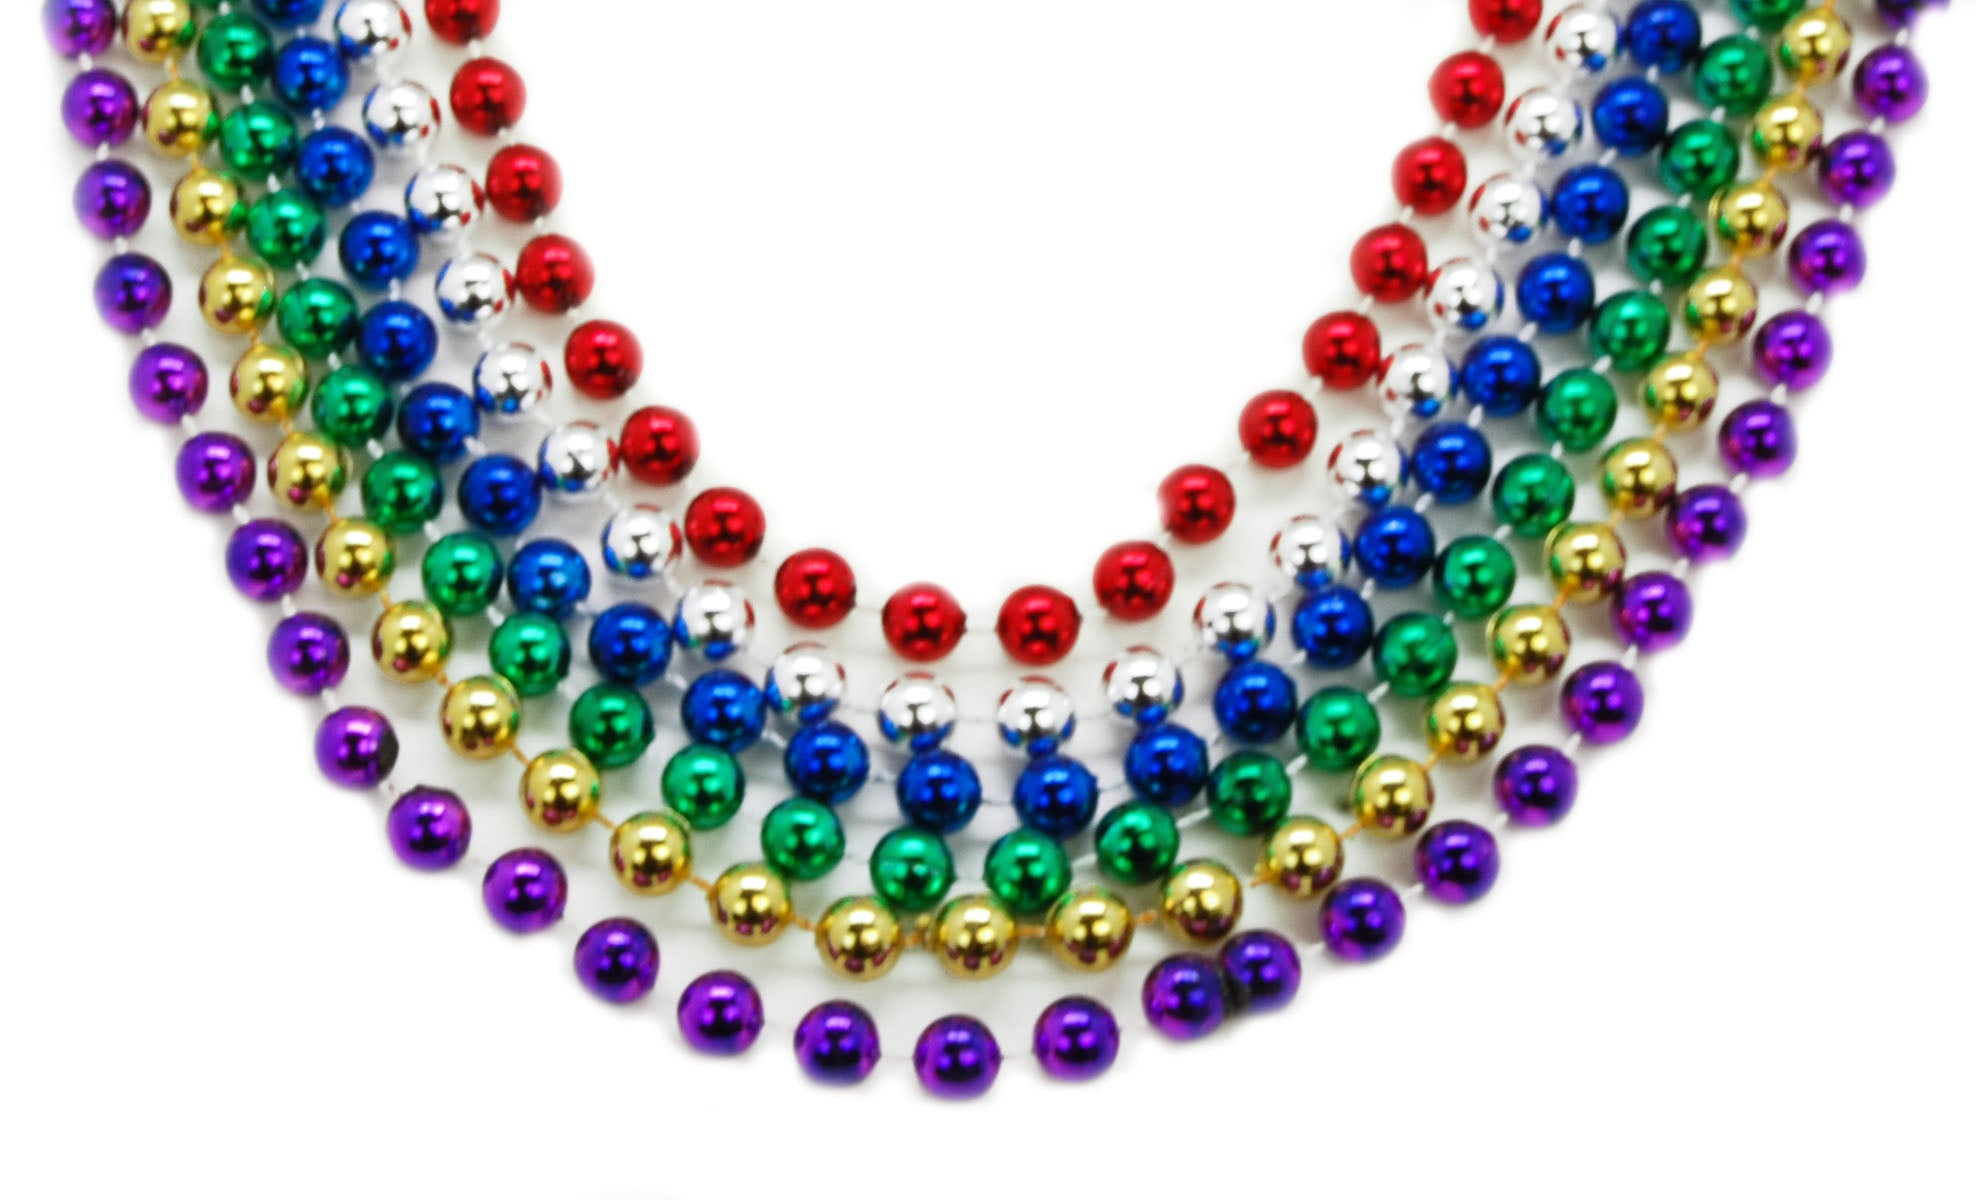 40 10mm Round Beads Assorted Colors